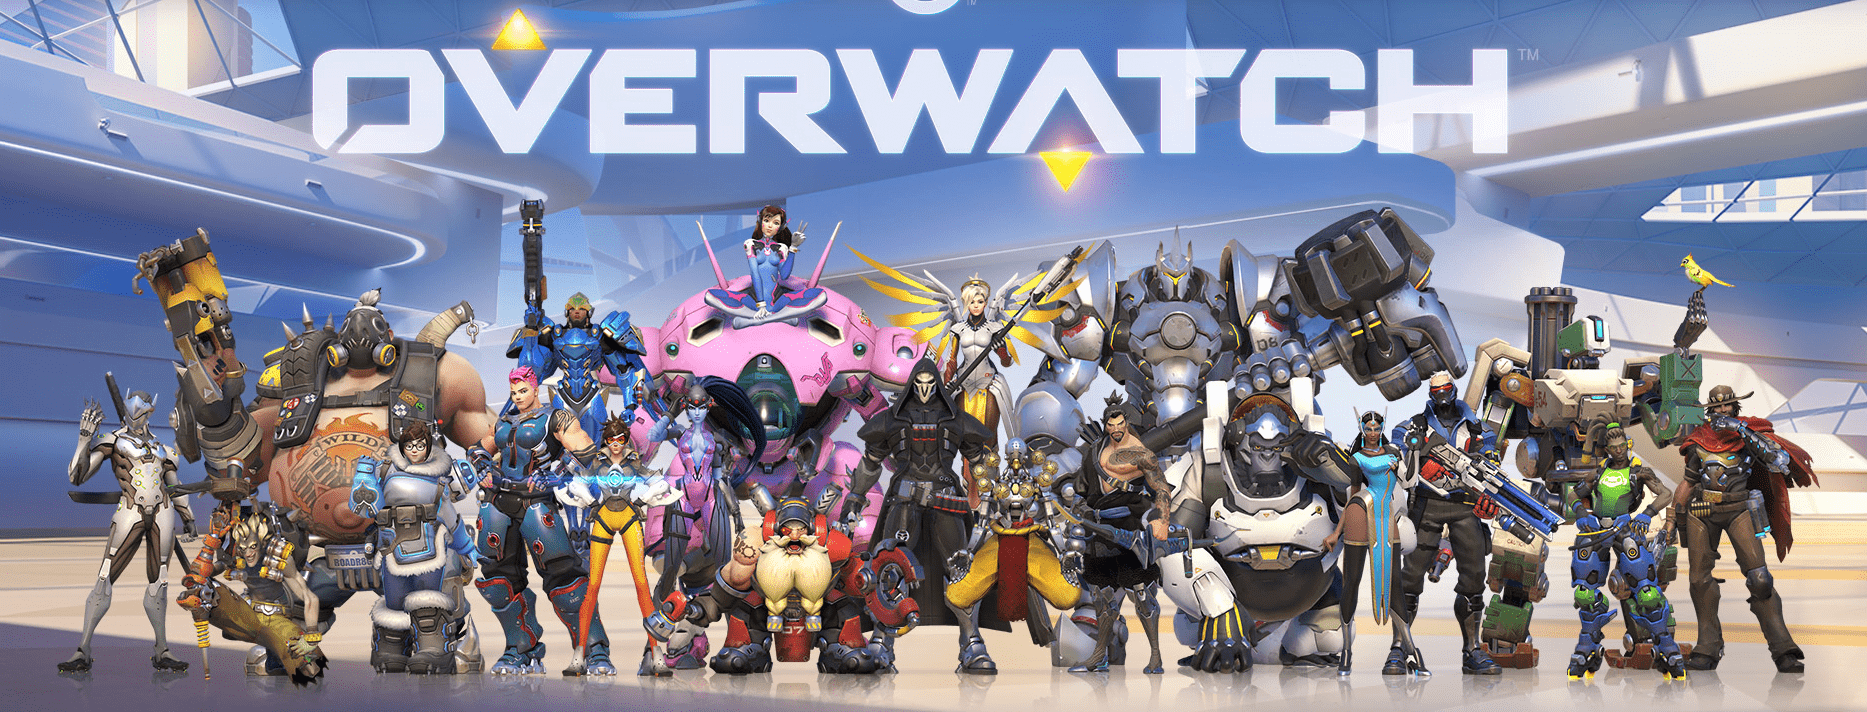 Overwatch Update Version 2.68 New Full Patch Notes PS4 Full Details Here